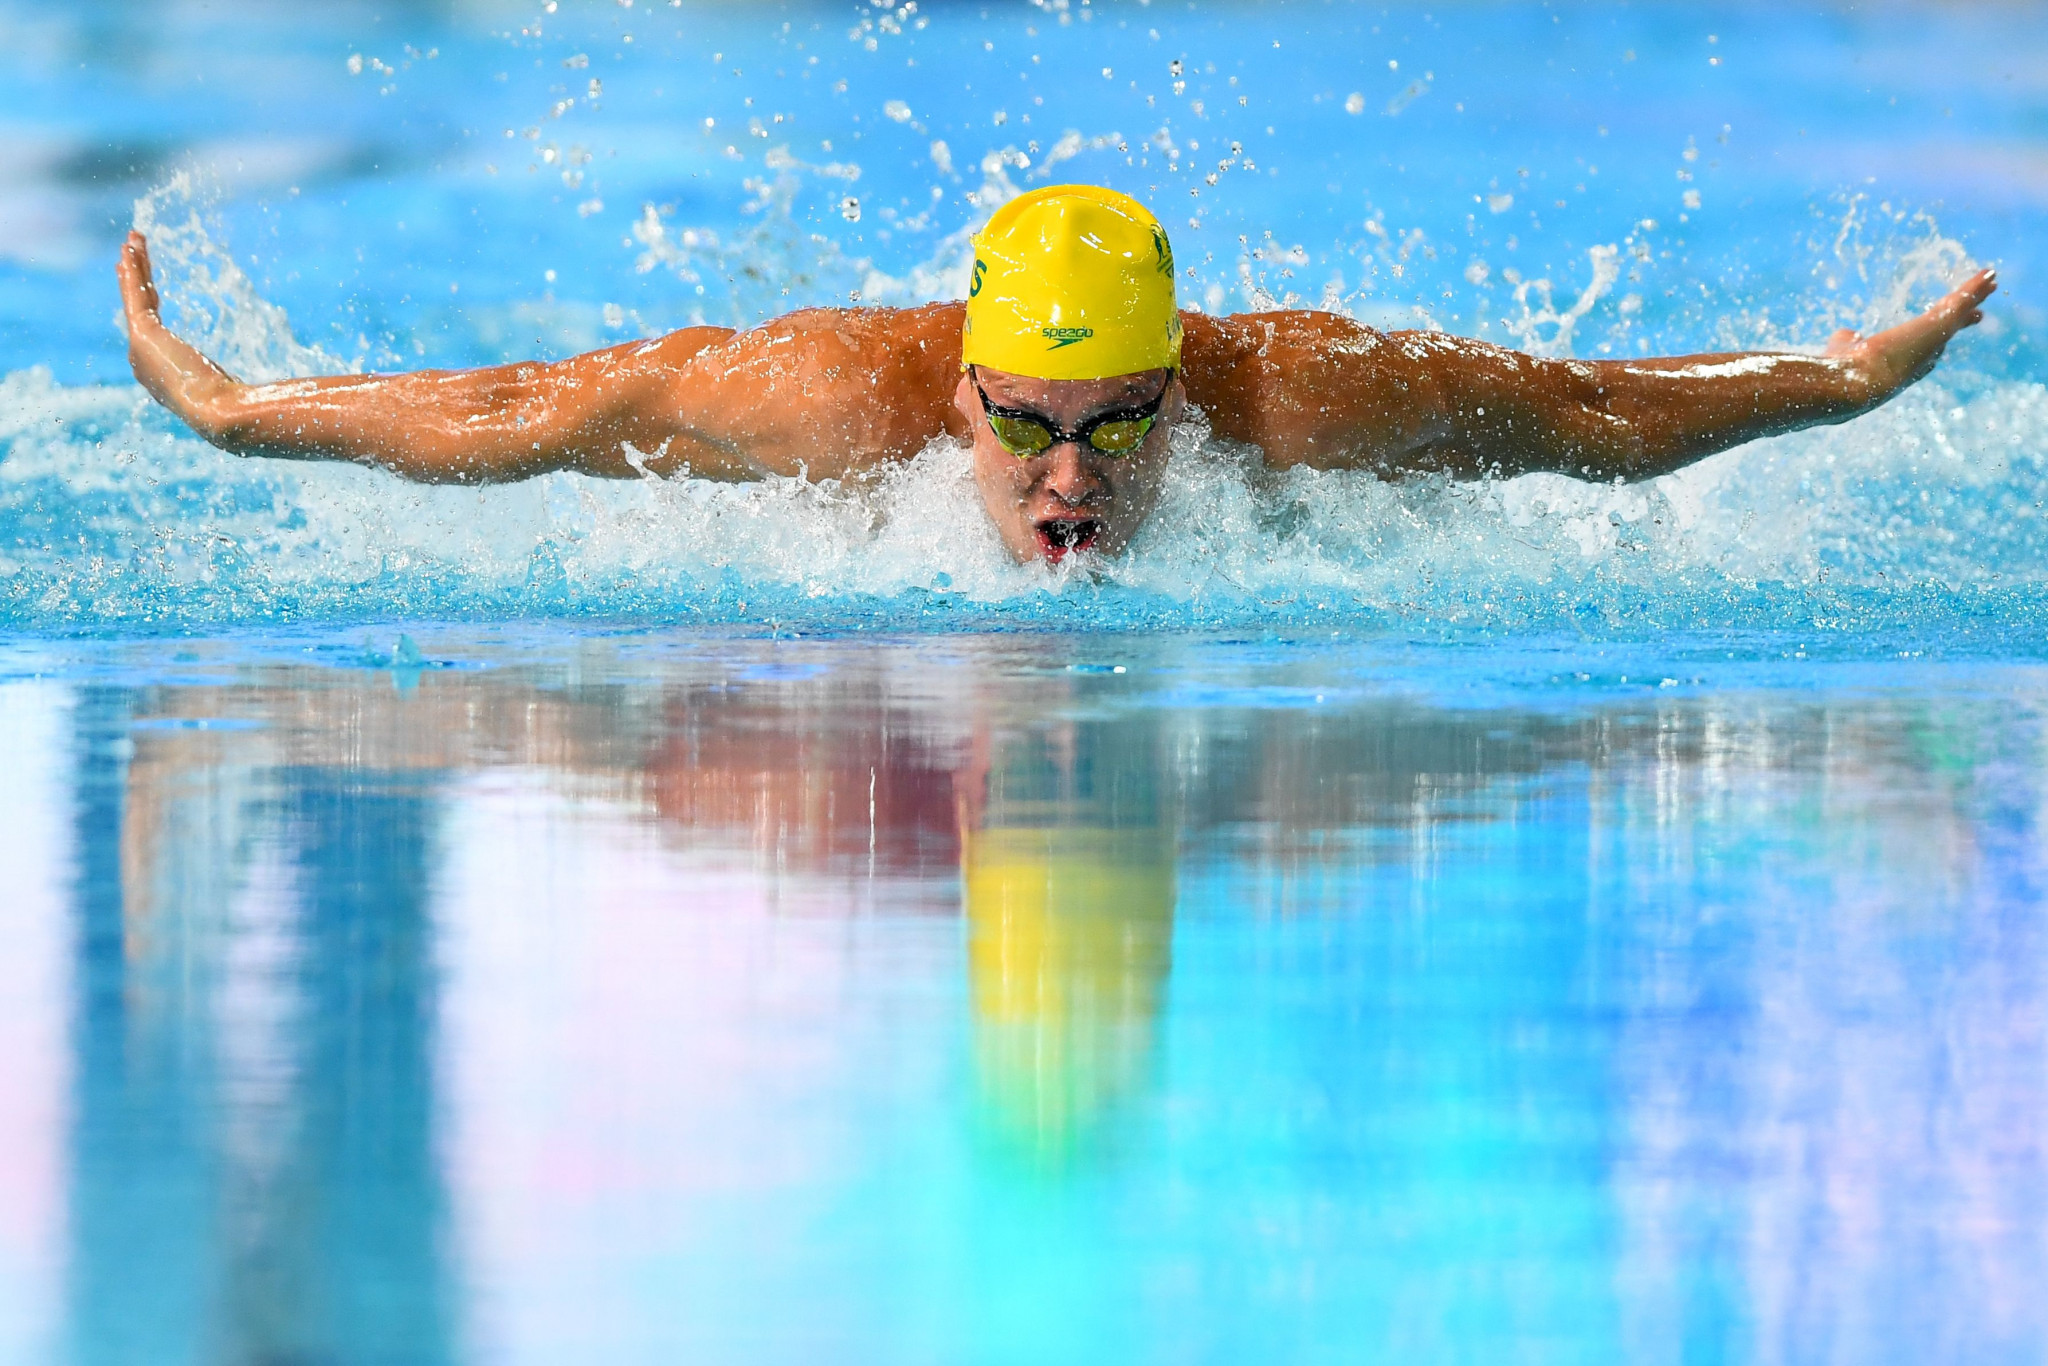 Mitch Larkin was among the most successful Australian swimmer at Gold Coast 2018, winning five gold medals ©Getty Images